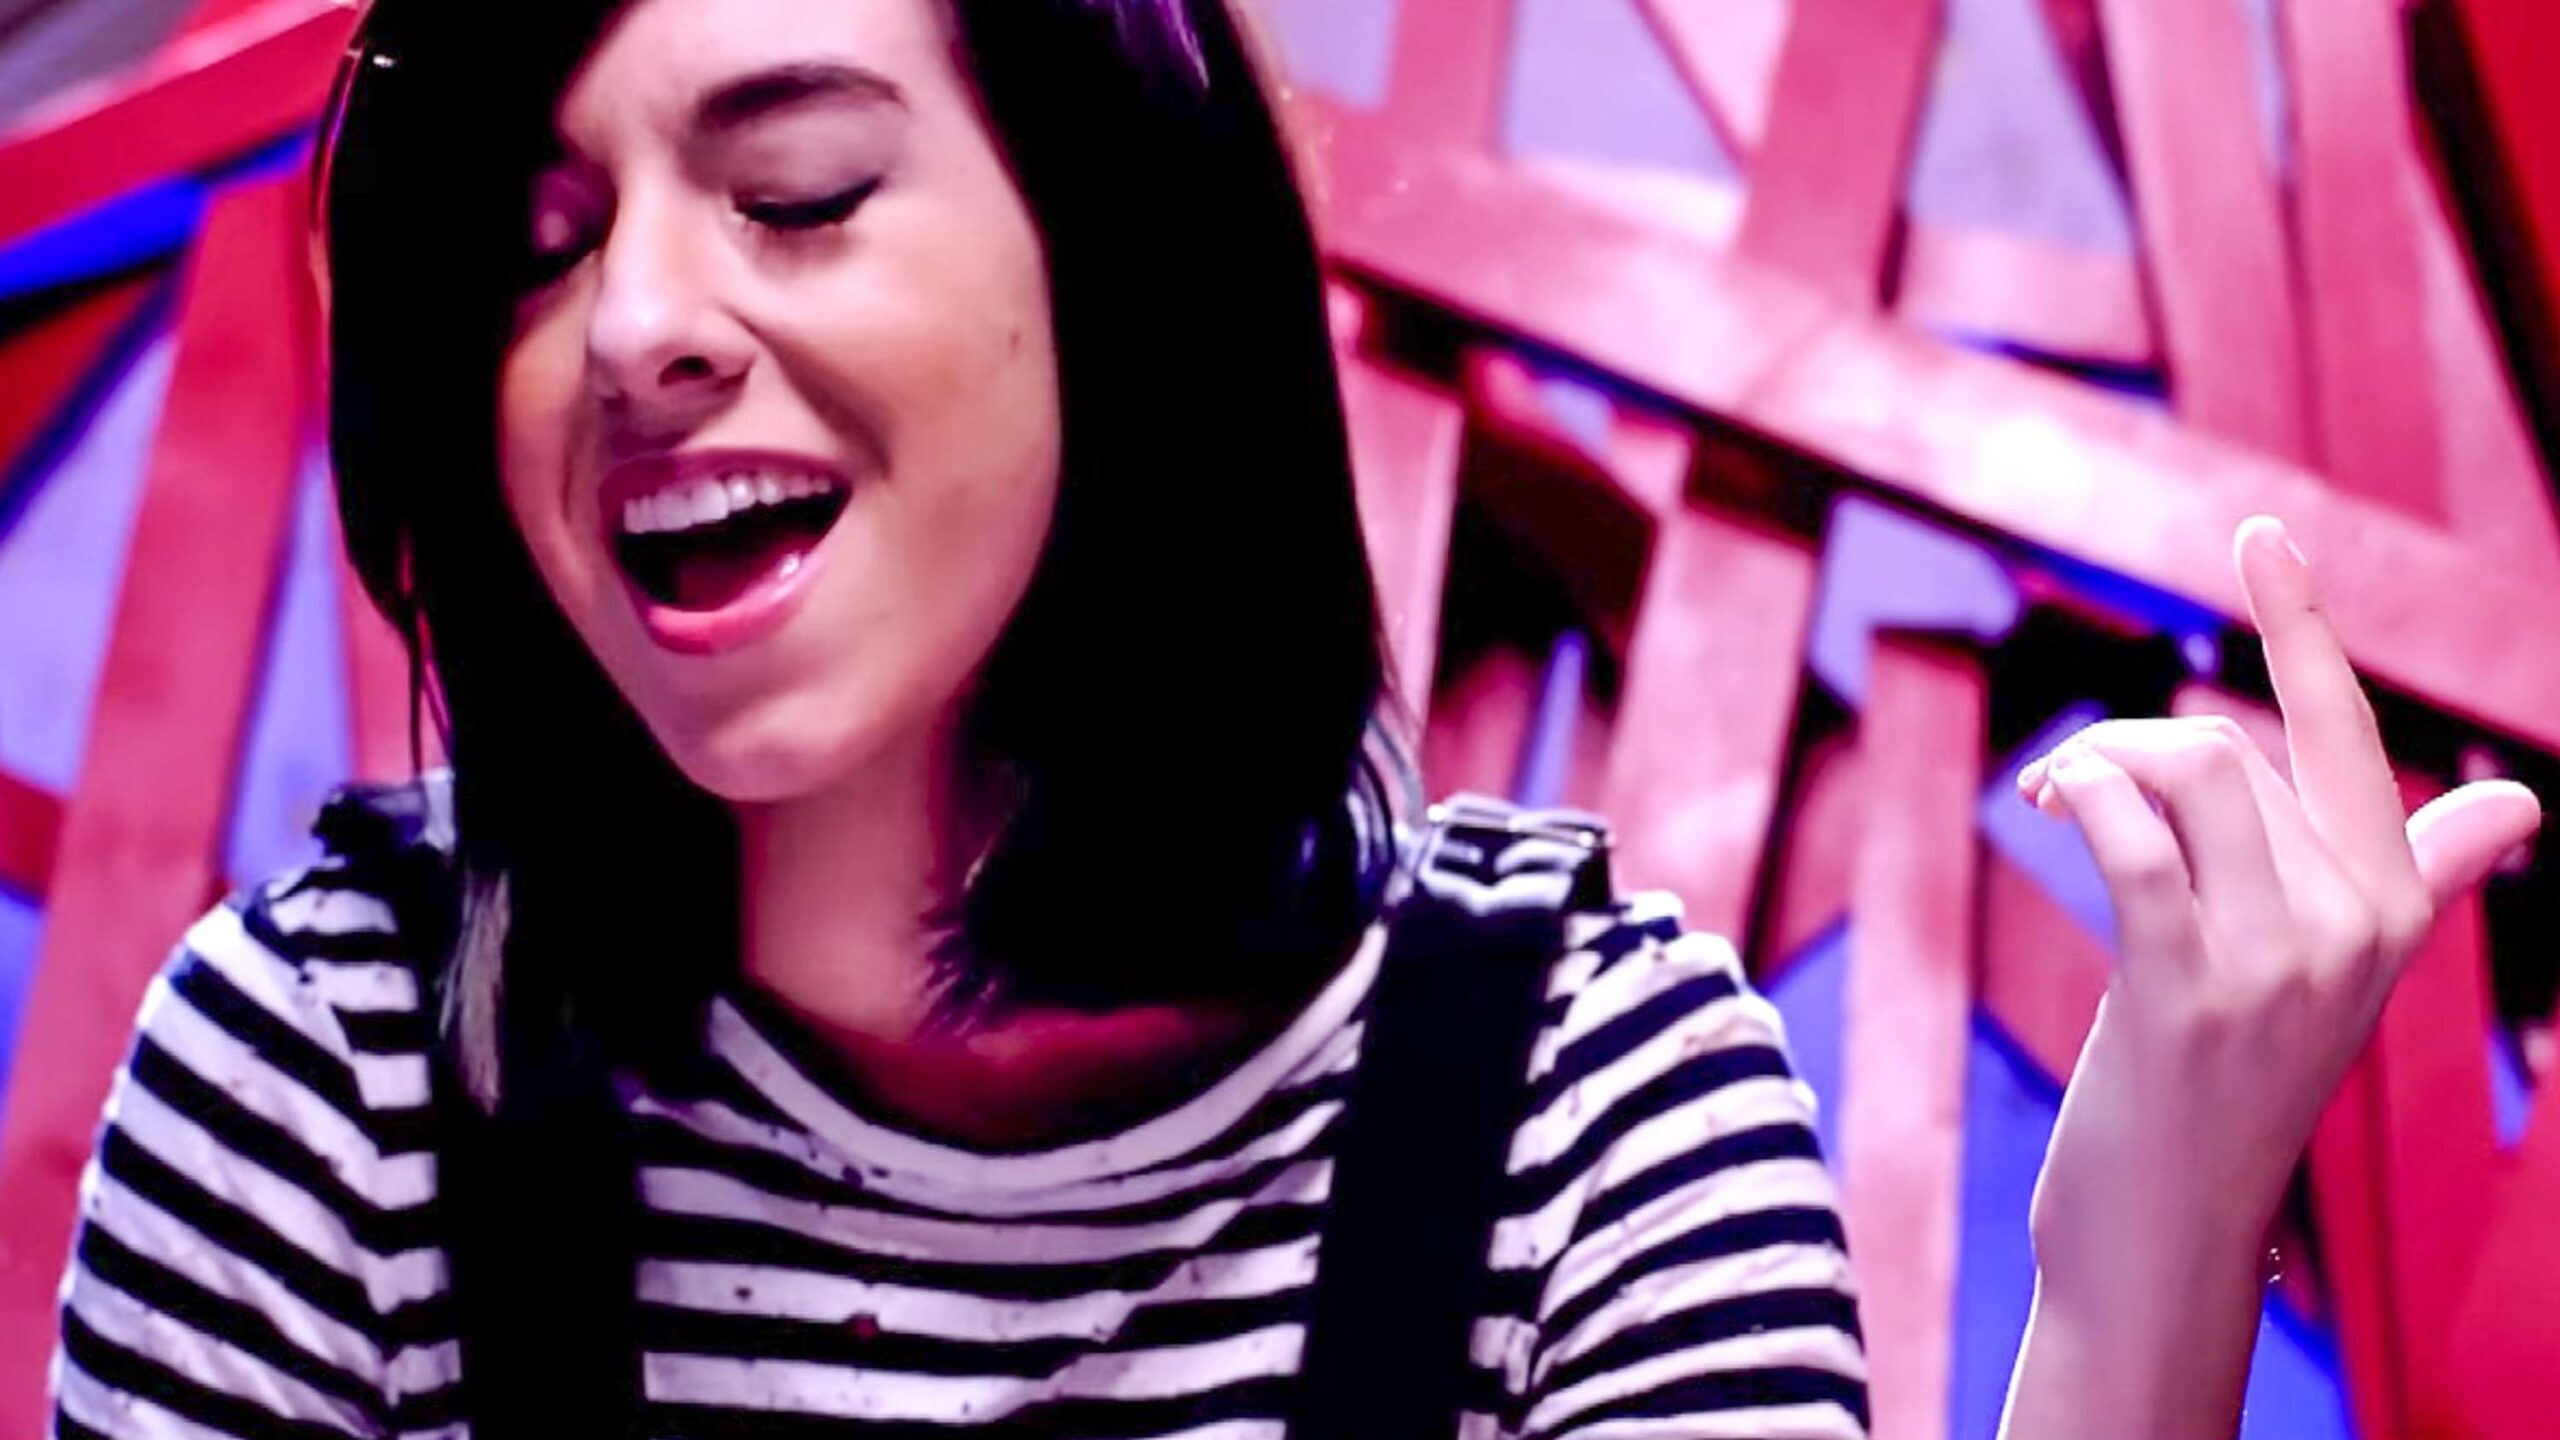 WATCH: Christina Grimmie’s 2nd music video released after death